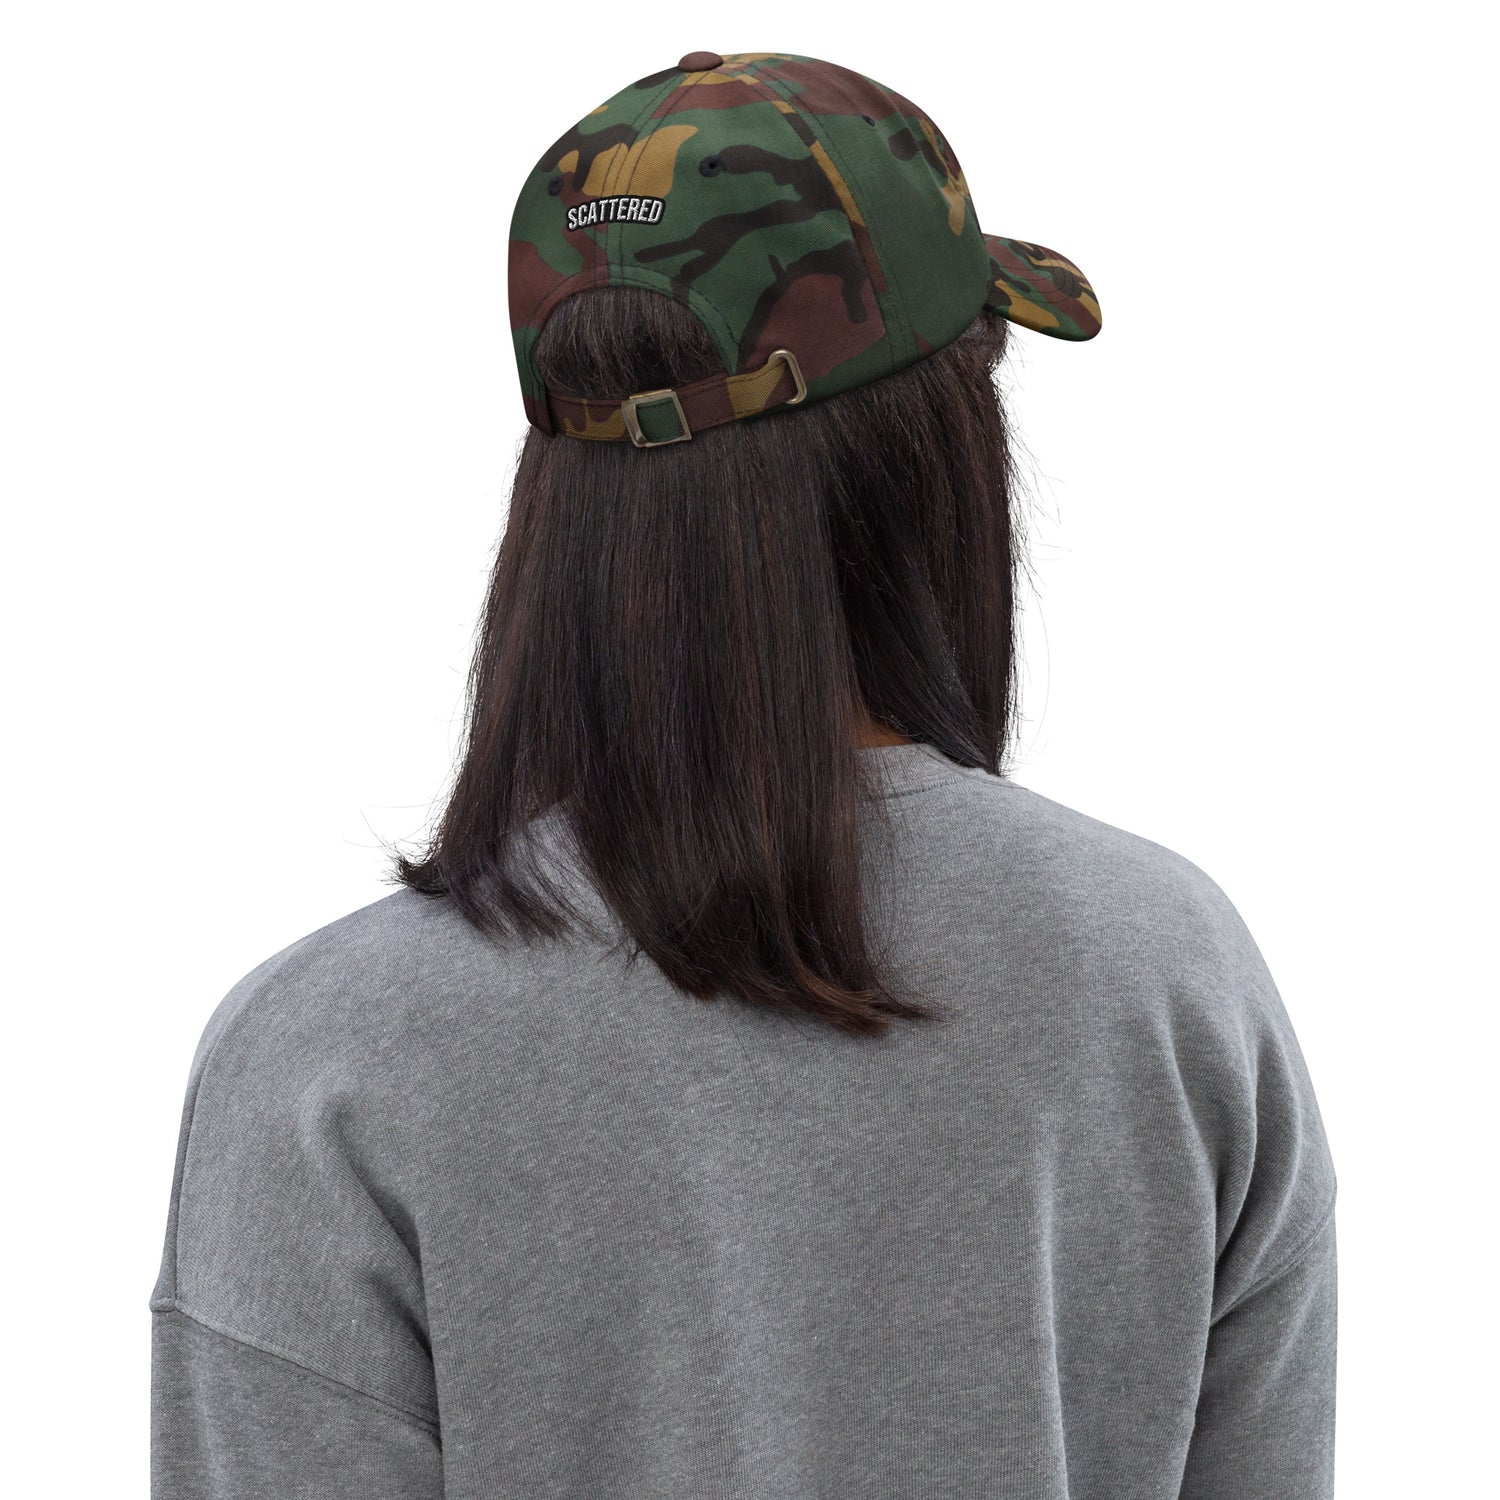 New York Apple Logo Embroidered Camo Dad Hat Scattered Streetwear